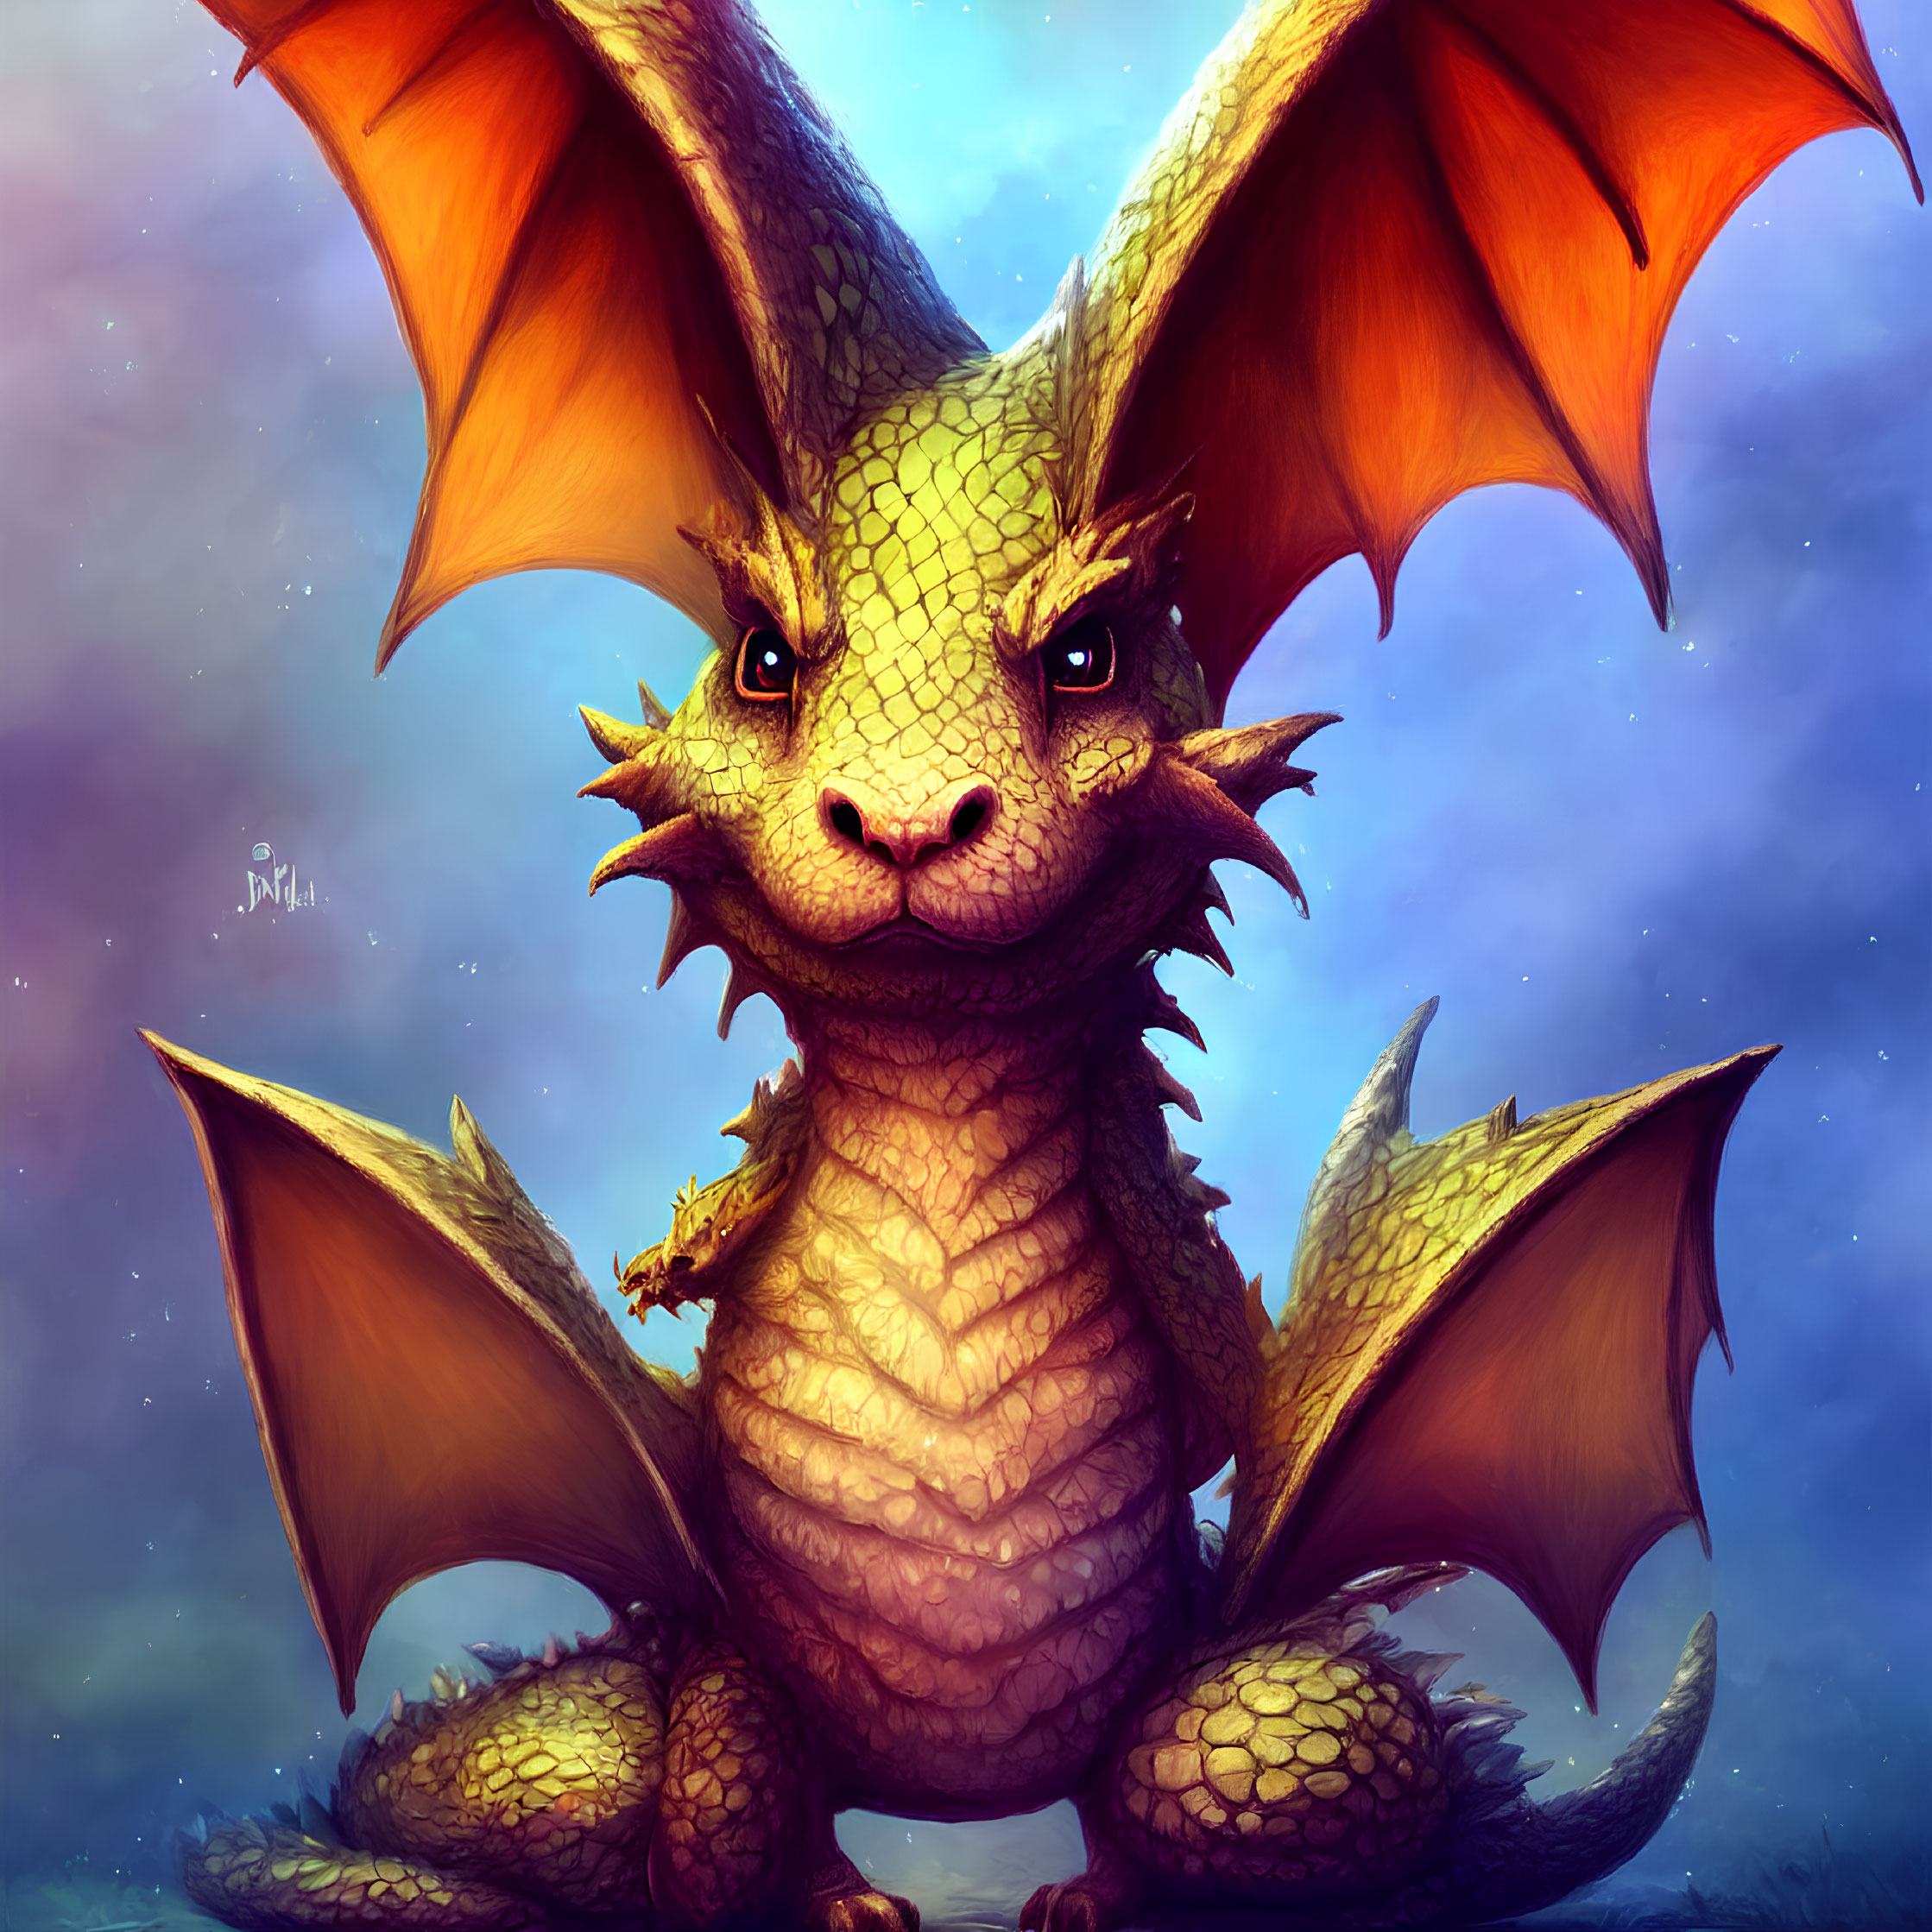 Detailed illustration of friendly dragon with large expressive eyes, orange wings, and shiny scaled skin under purple sky